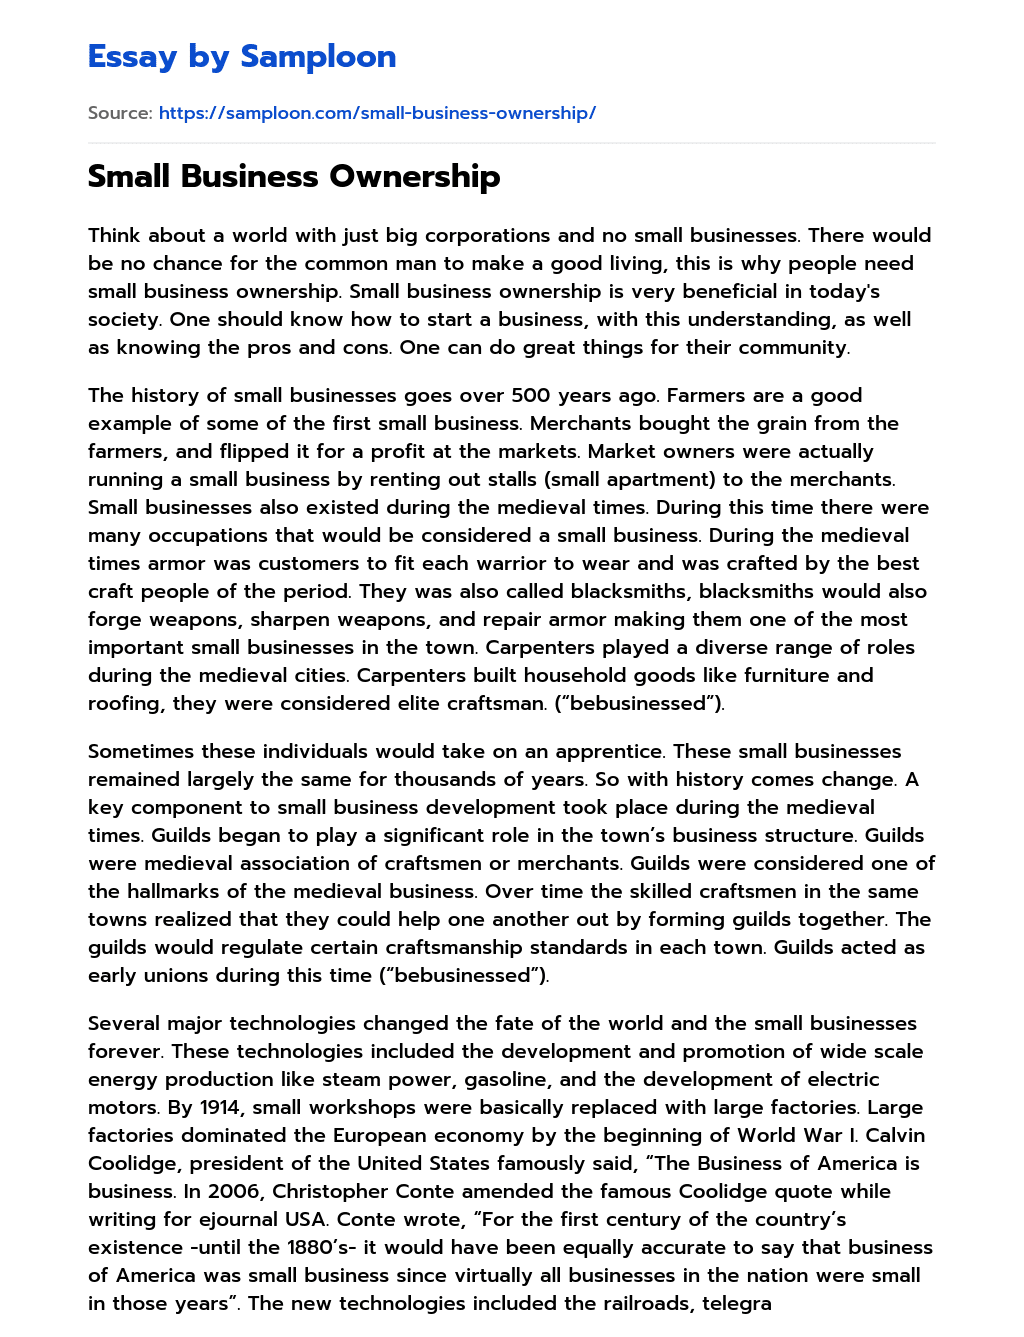 Small Business Ownership essay